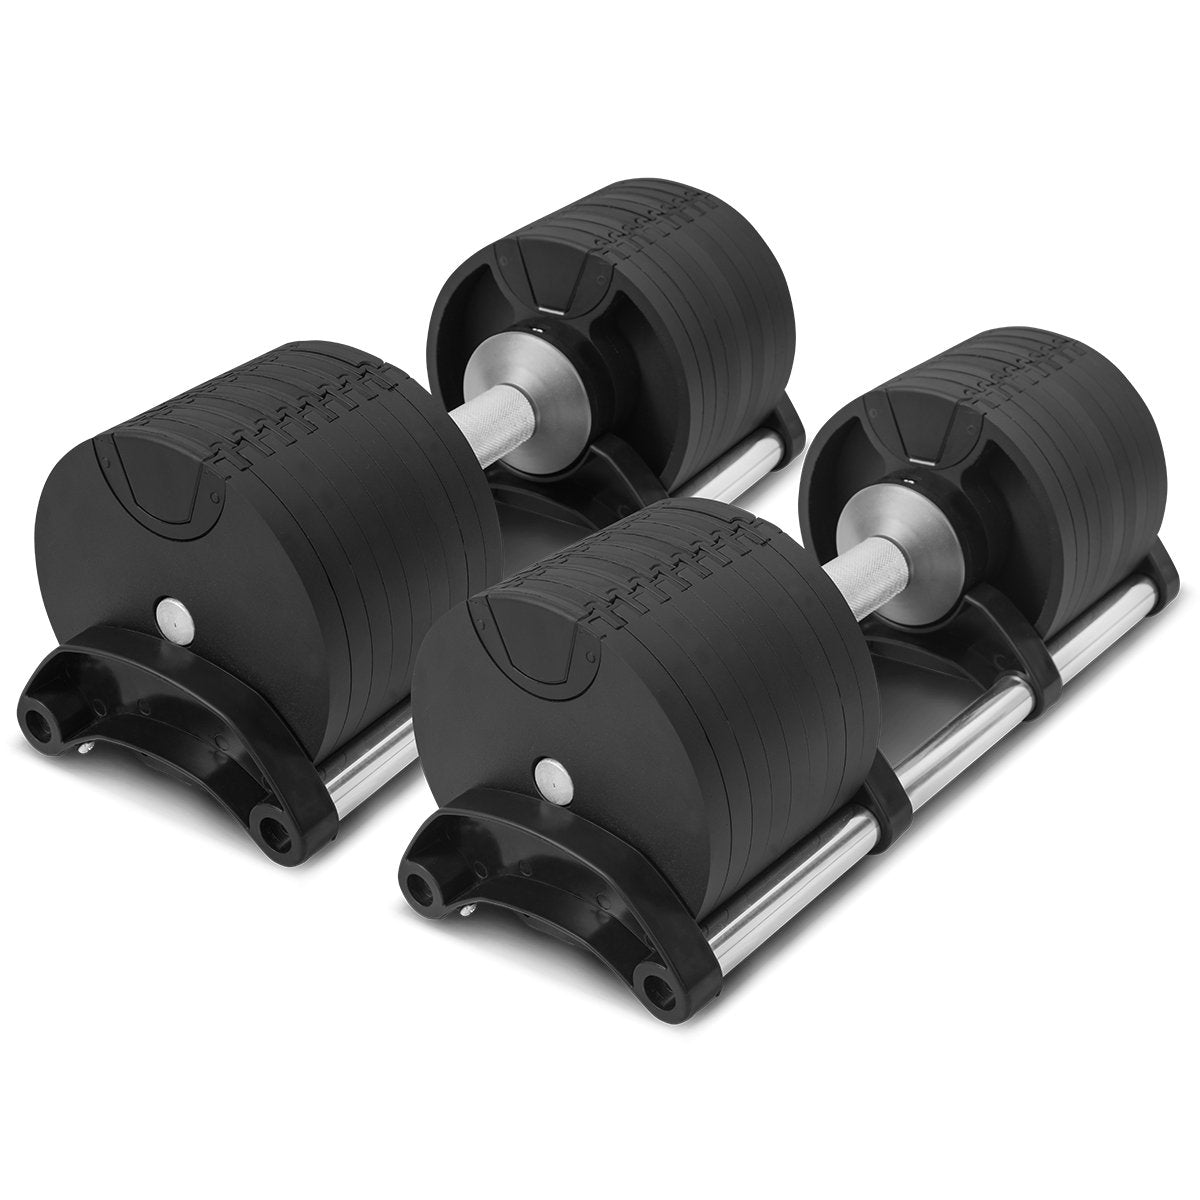 Core Home Fitness Adjustable Dumbbell Pair 5-50, 45% OFF